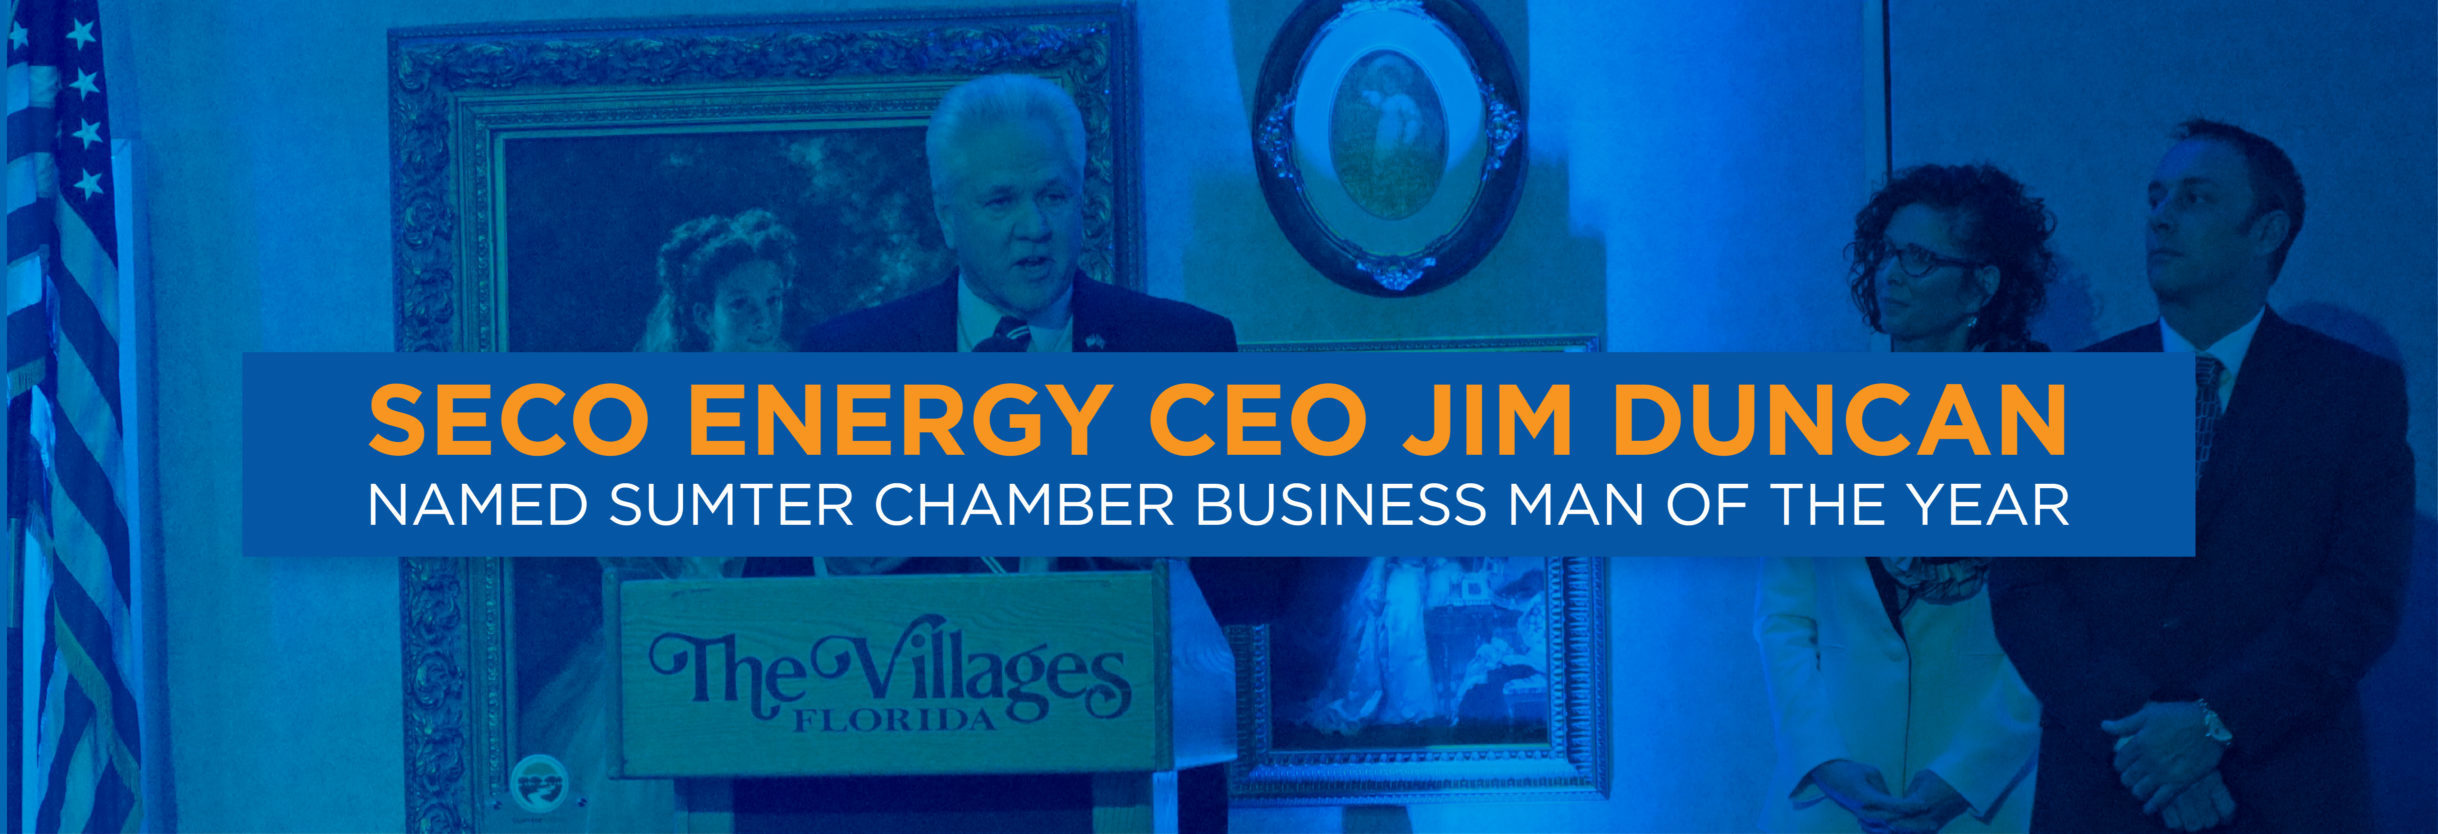 SECO Energy CEO Jim Duncan Named Sumter Chamber Business Man of the Year